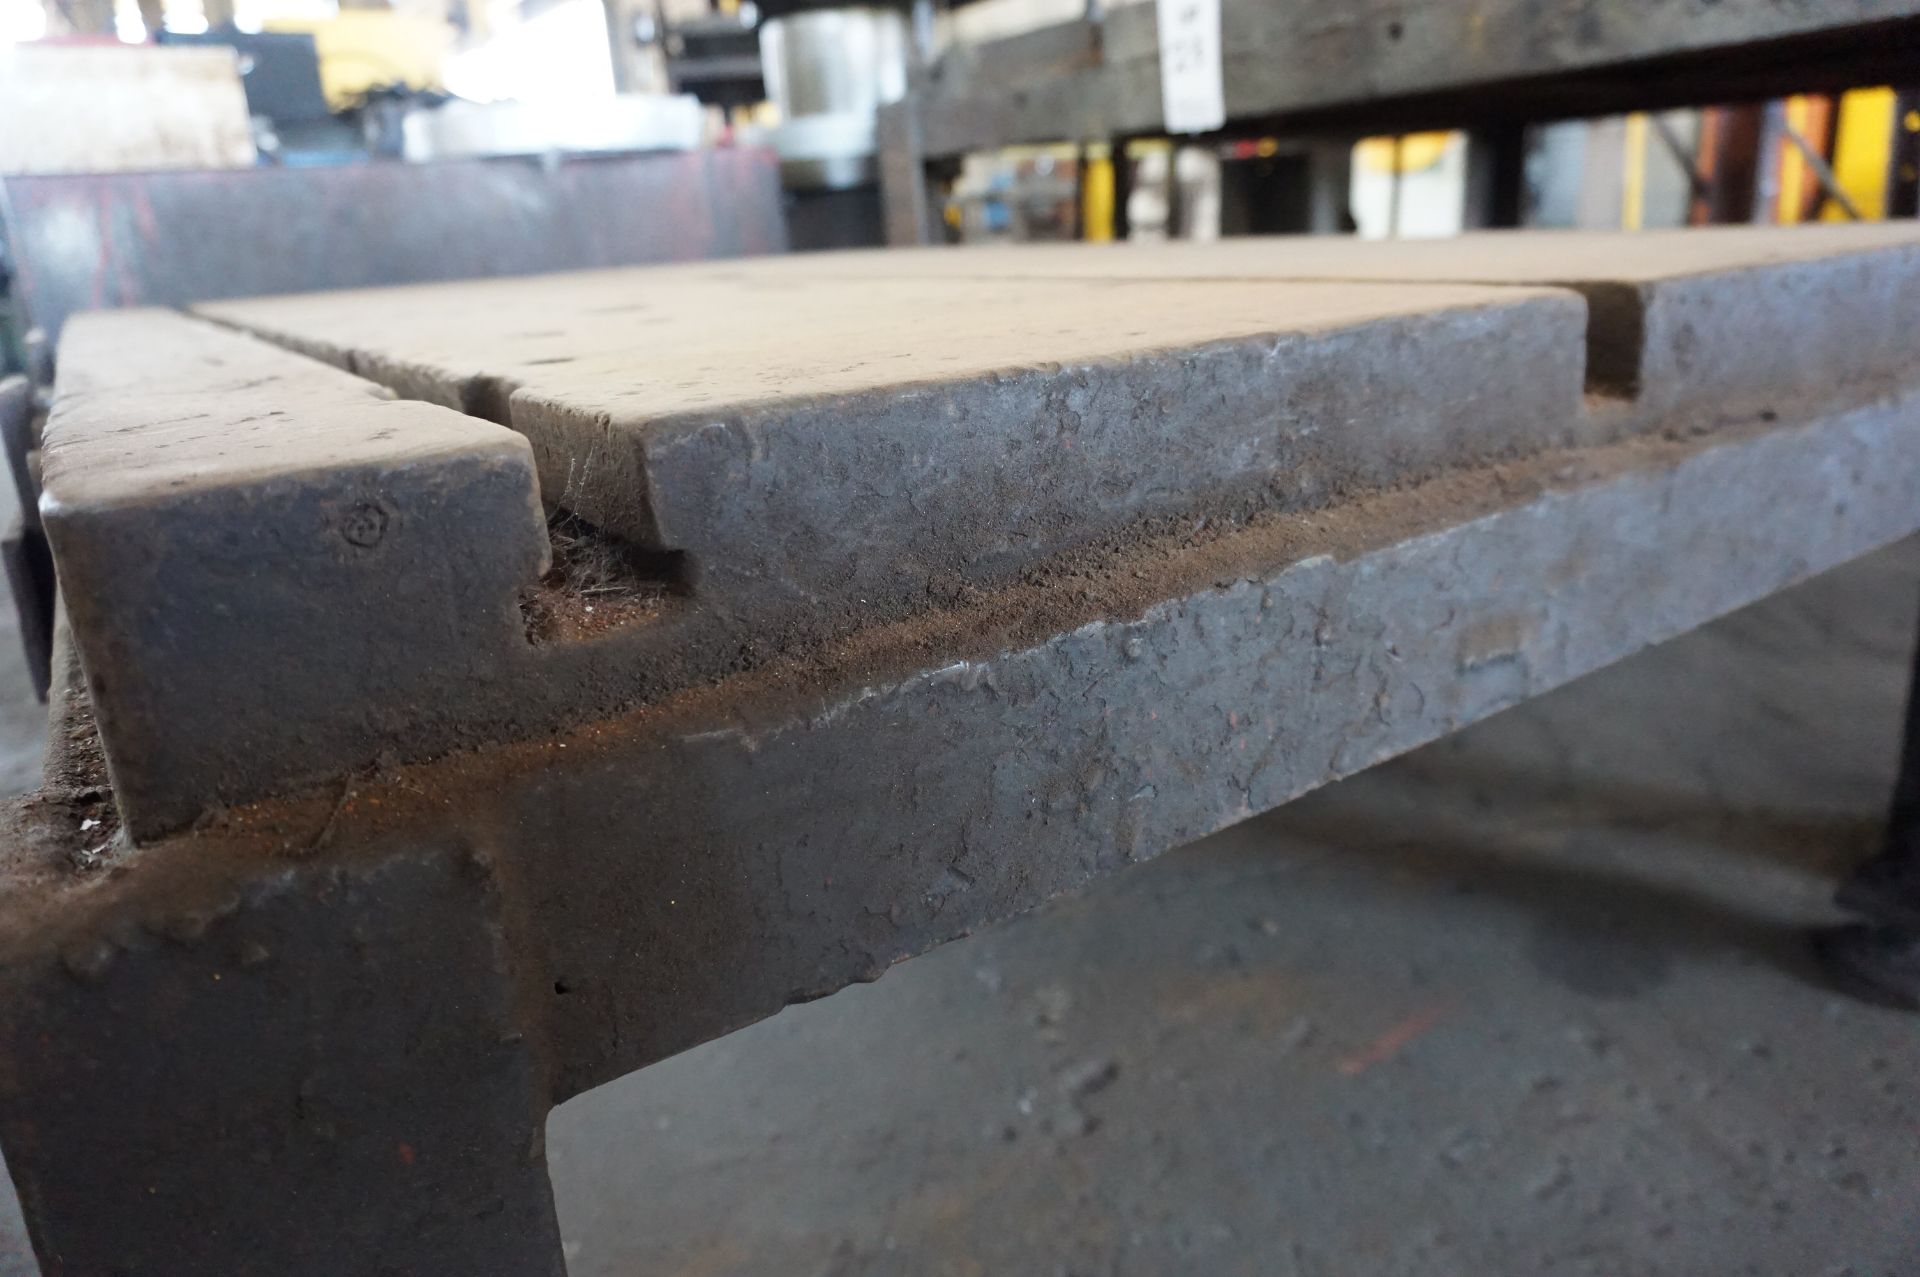 STEEL T-SLOT TABLE, DIMENSIONS 60" X 40" X 21" - Image 3 of 3